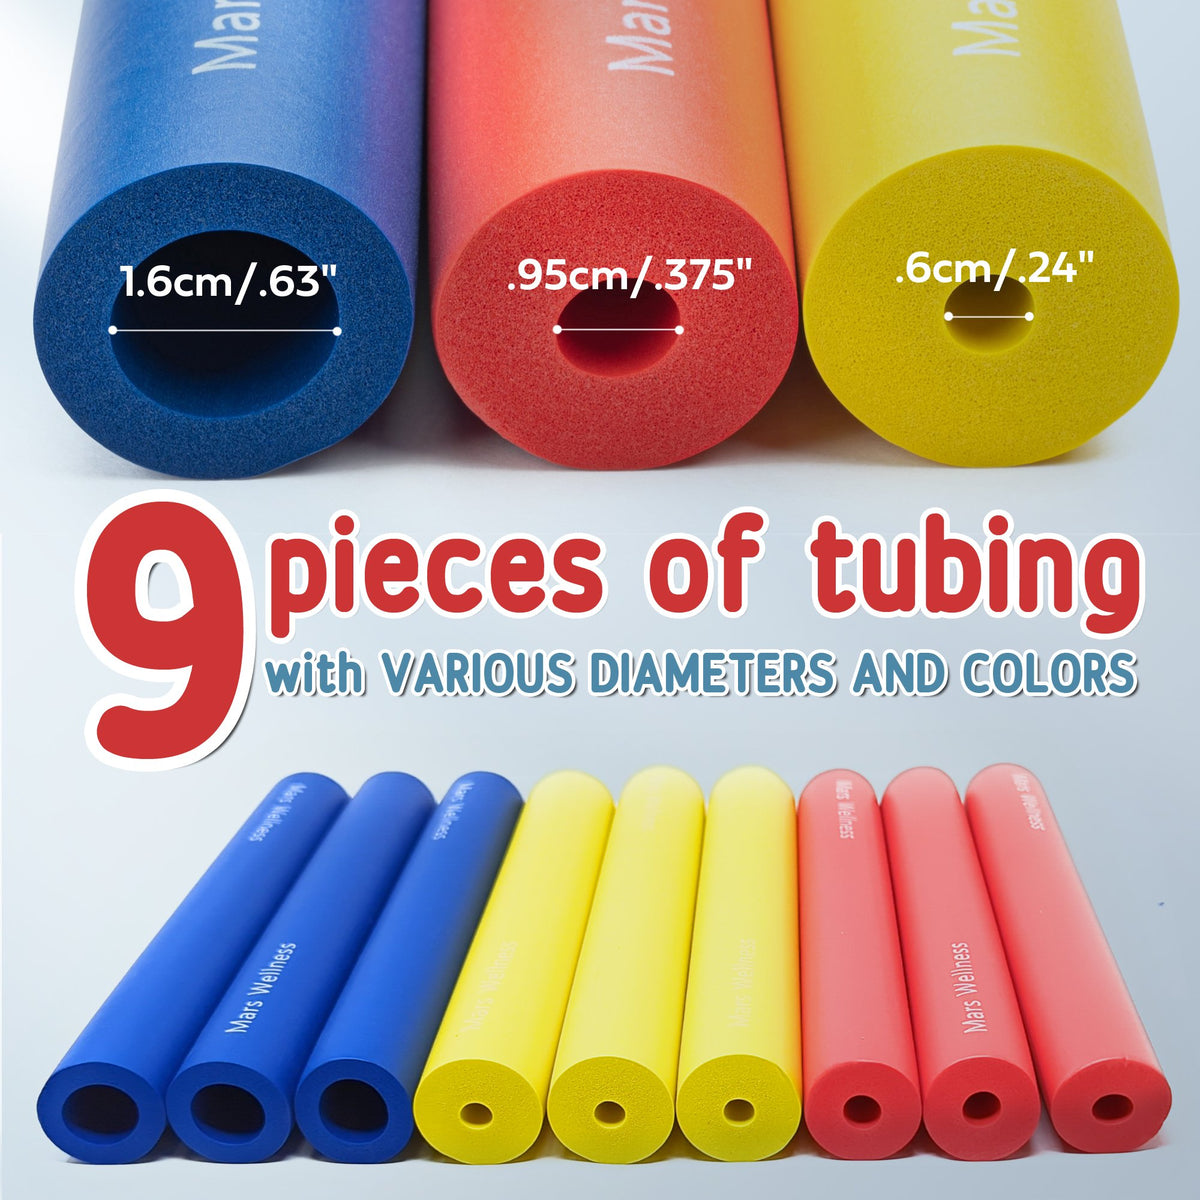 Foam Grip Tubing for Utensils - 9 PC 8" Handles - Closed Cell Foam Tube - Cut to Length - Adaptive Utensils Grip Tubing - Fits Most Utensils and pens